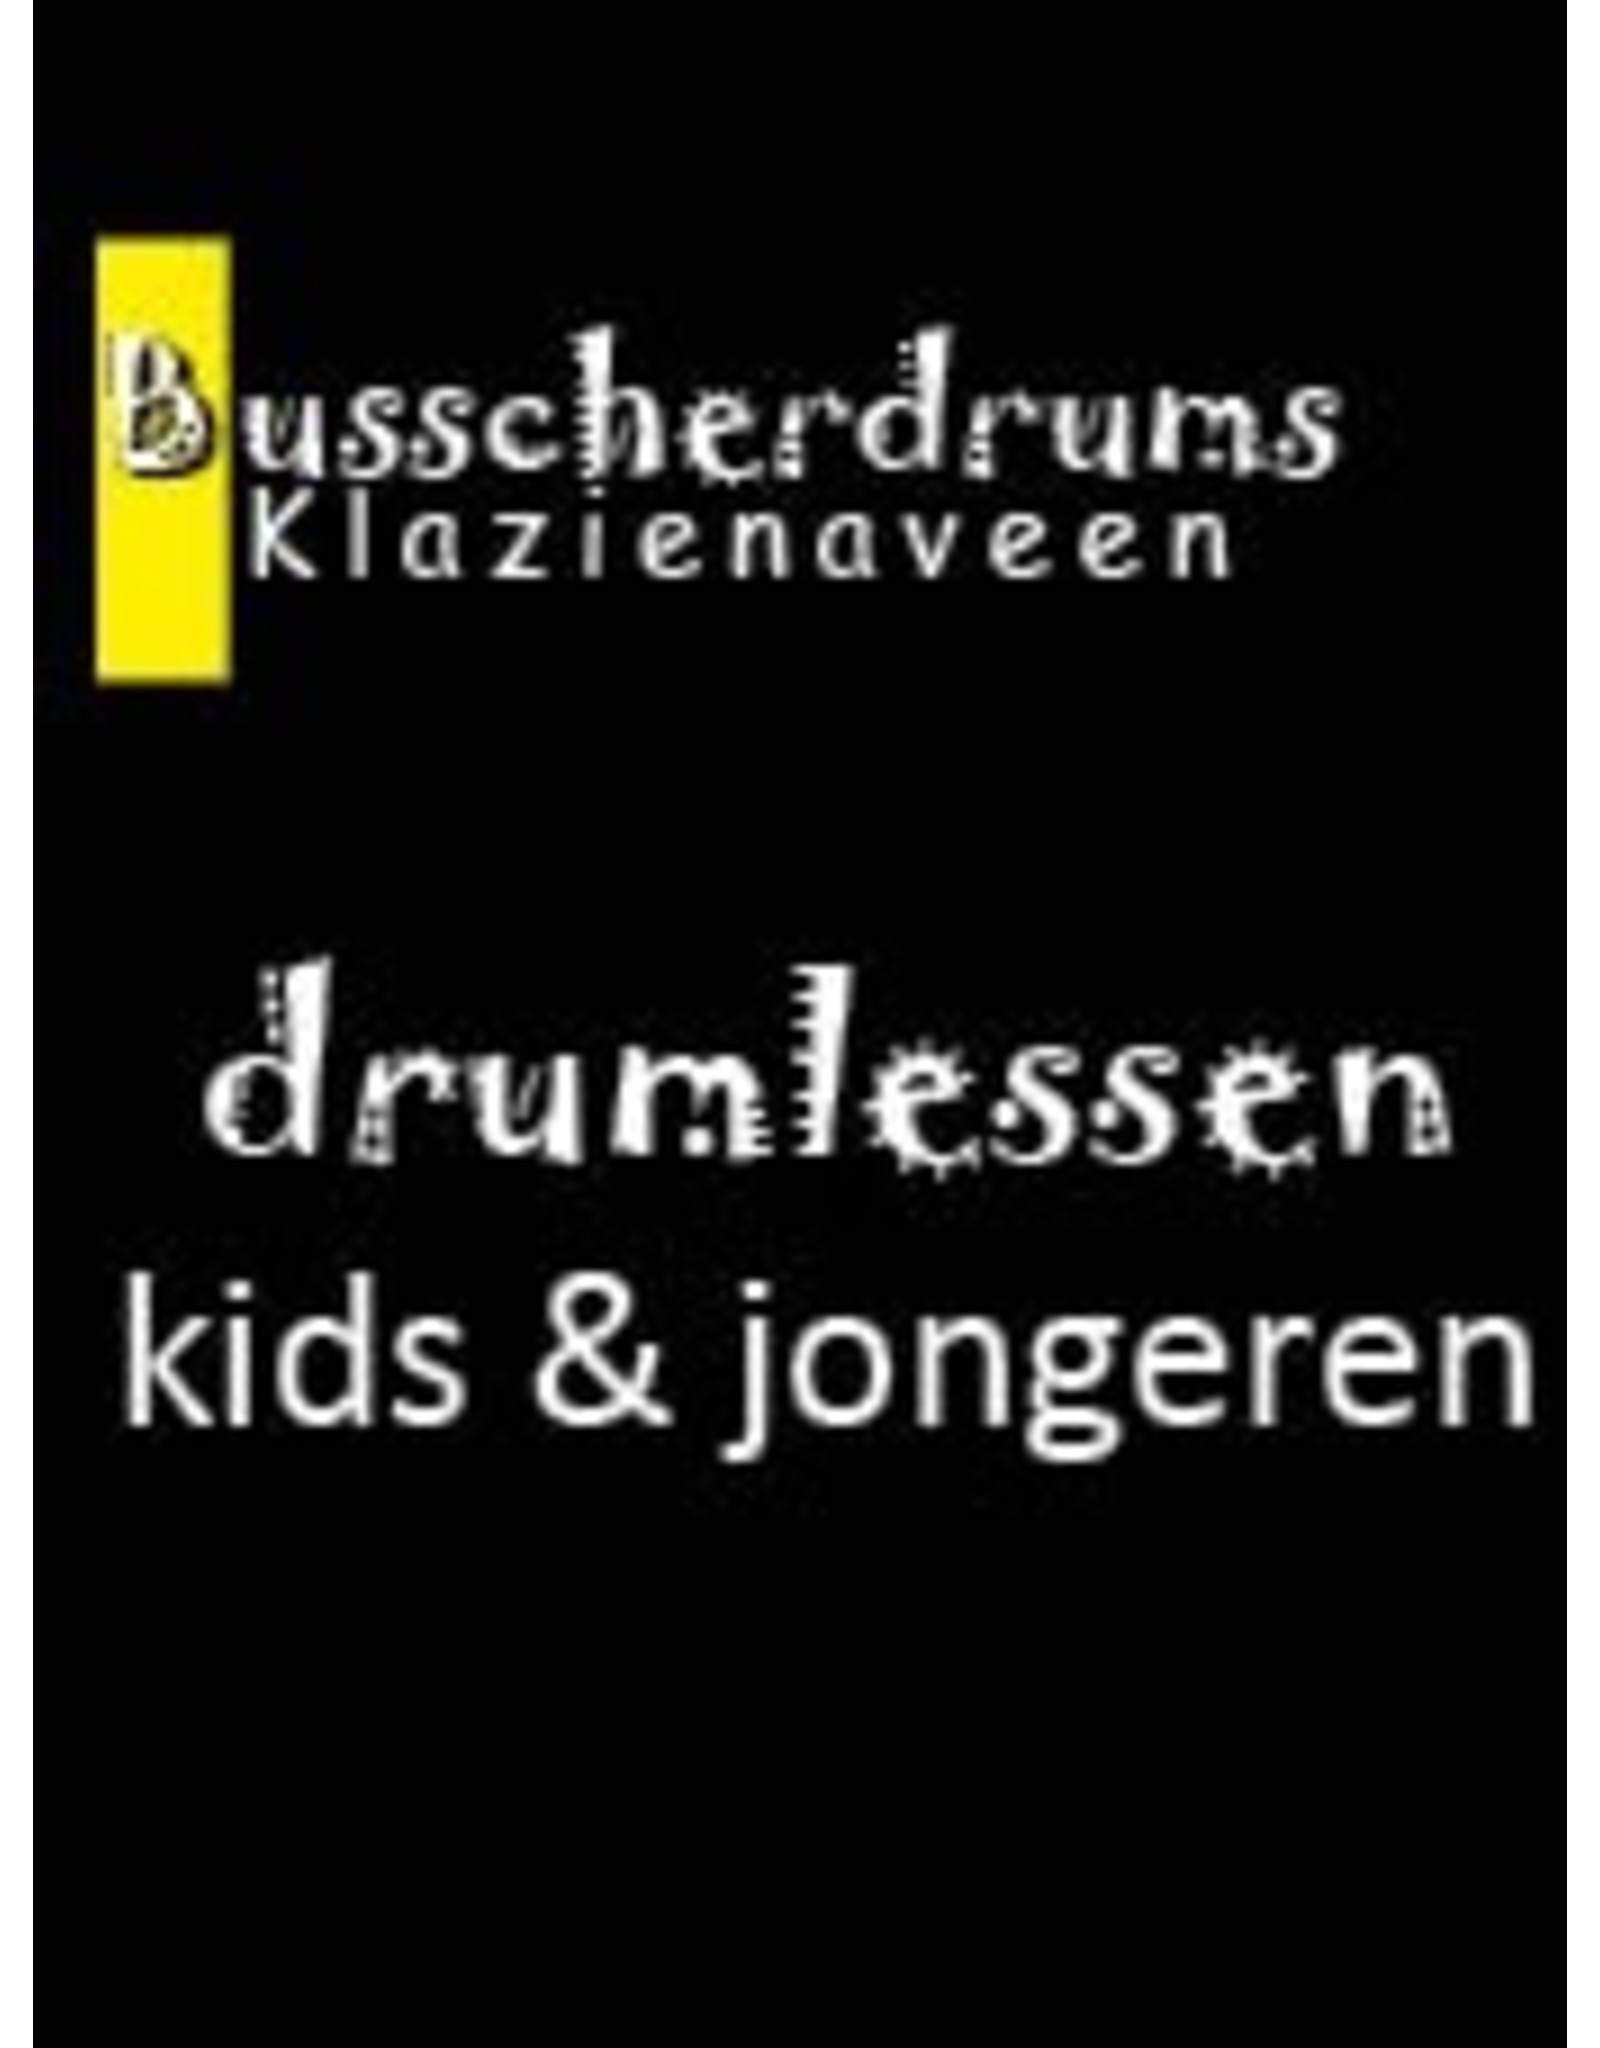 Busscherdrums Drum Lessons monthly card 20 minutes weekly youth 101